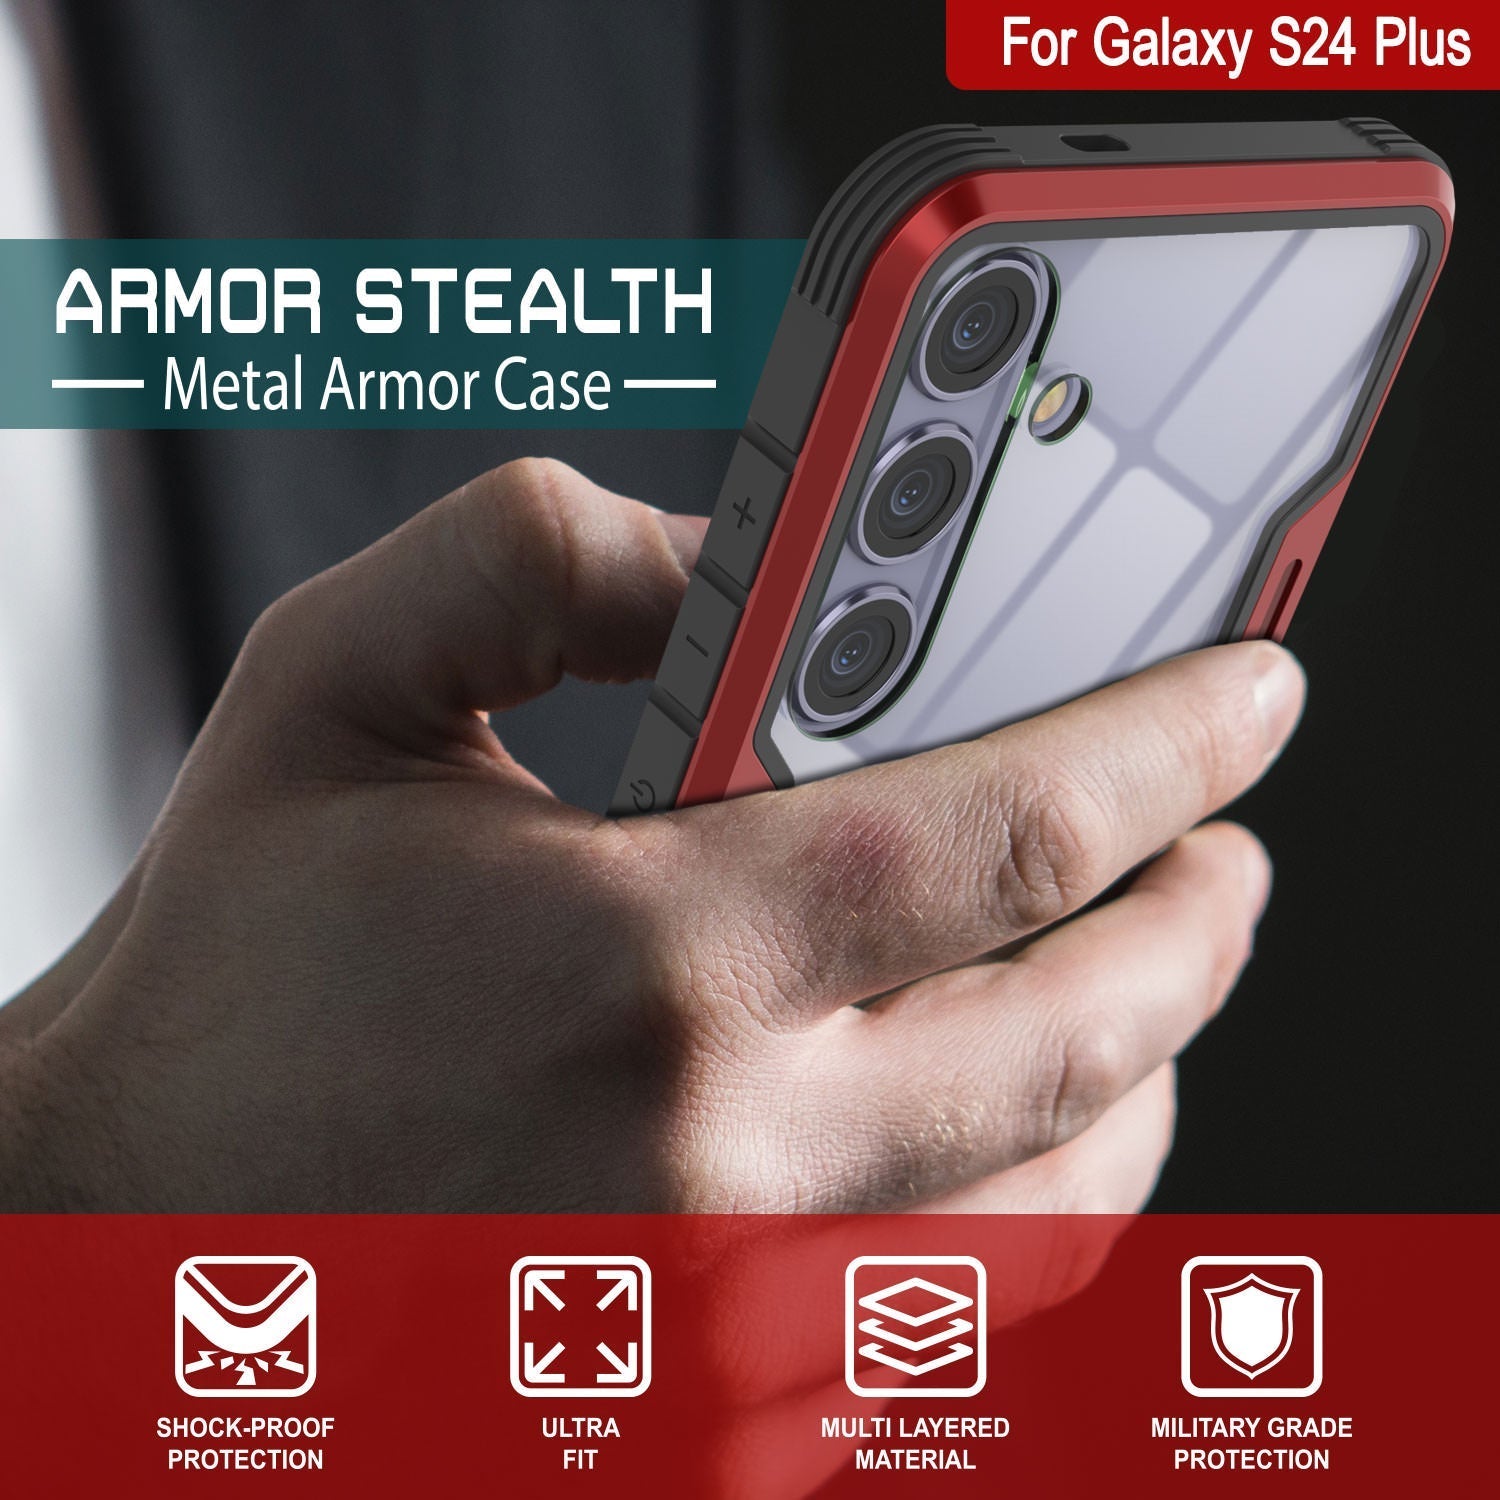 Punkcase S24+ Plus Armor Stealth Case Protective Military Grade Multilayer Cover [Red]